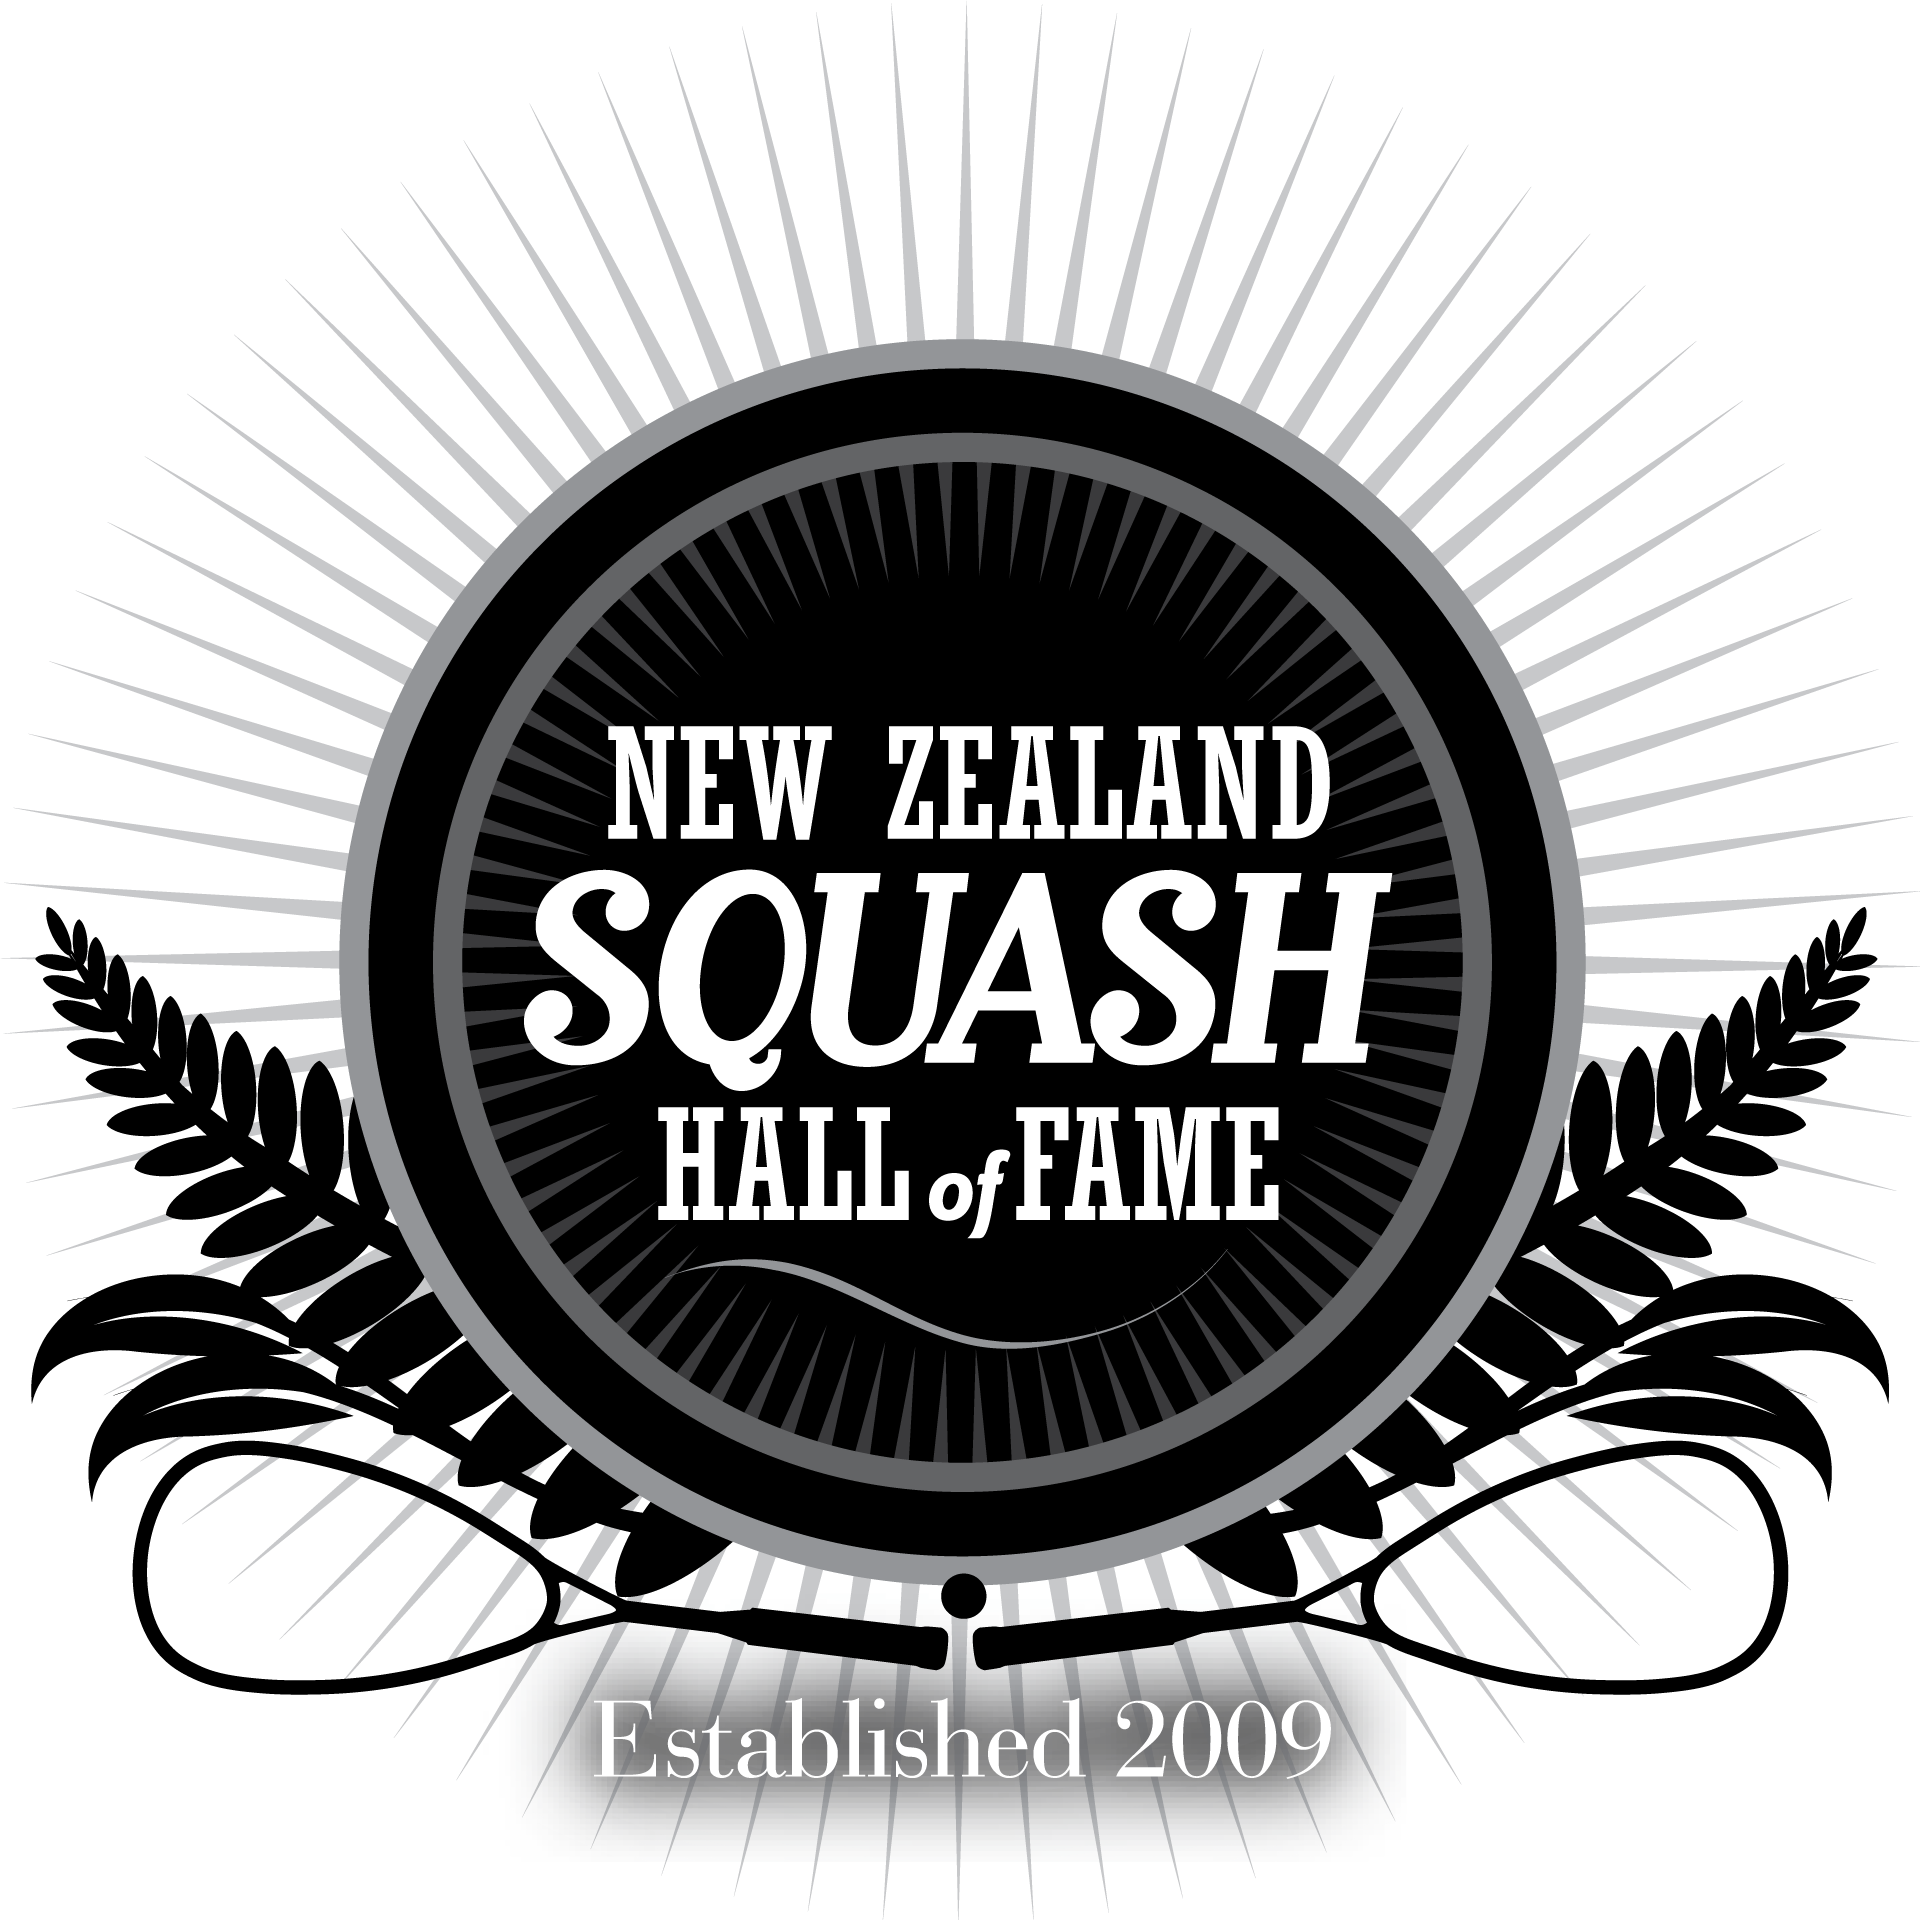 New Zealand Squash Hall of Fame